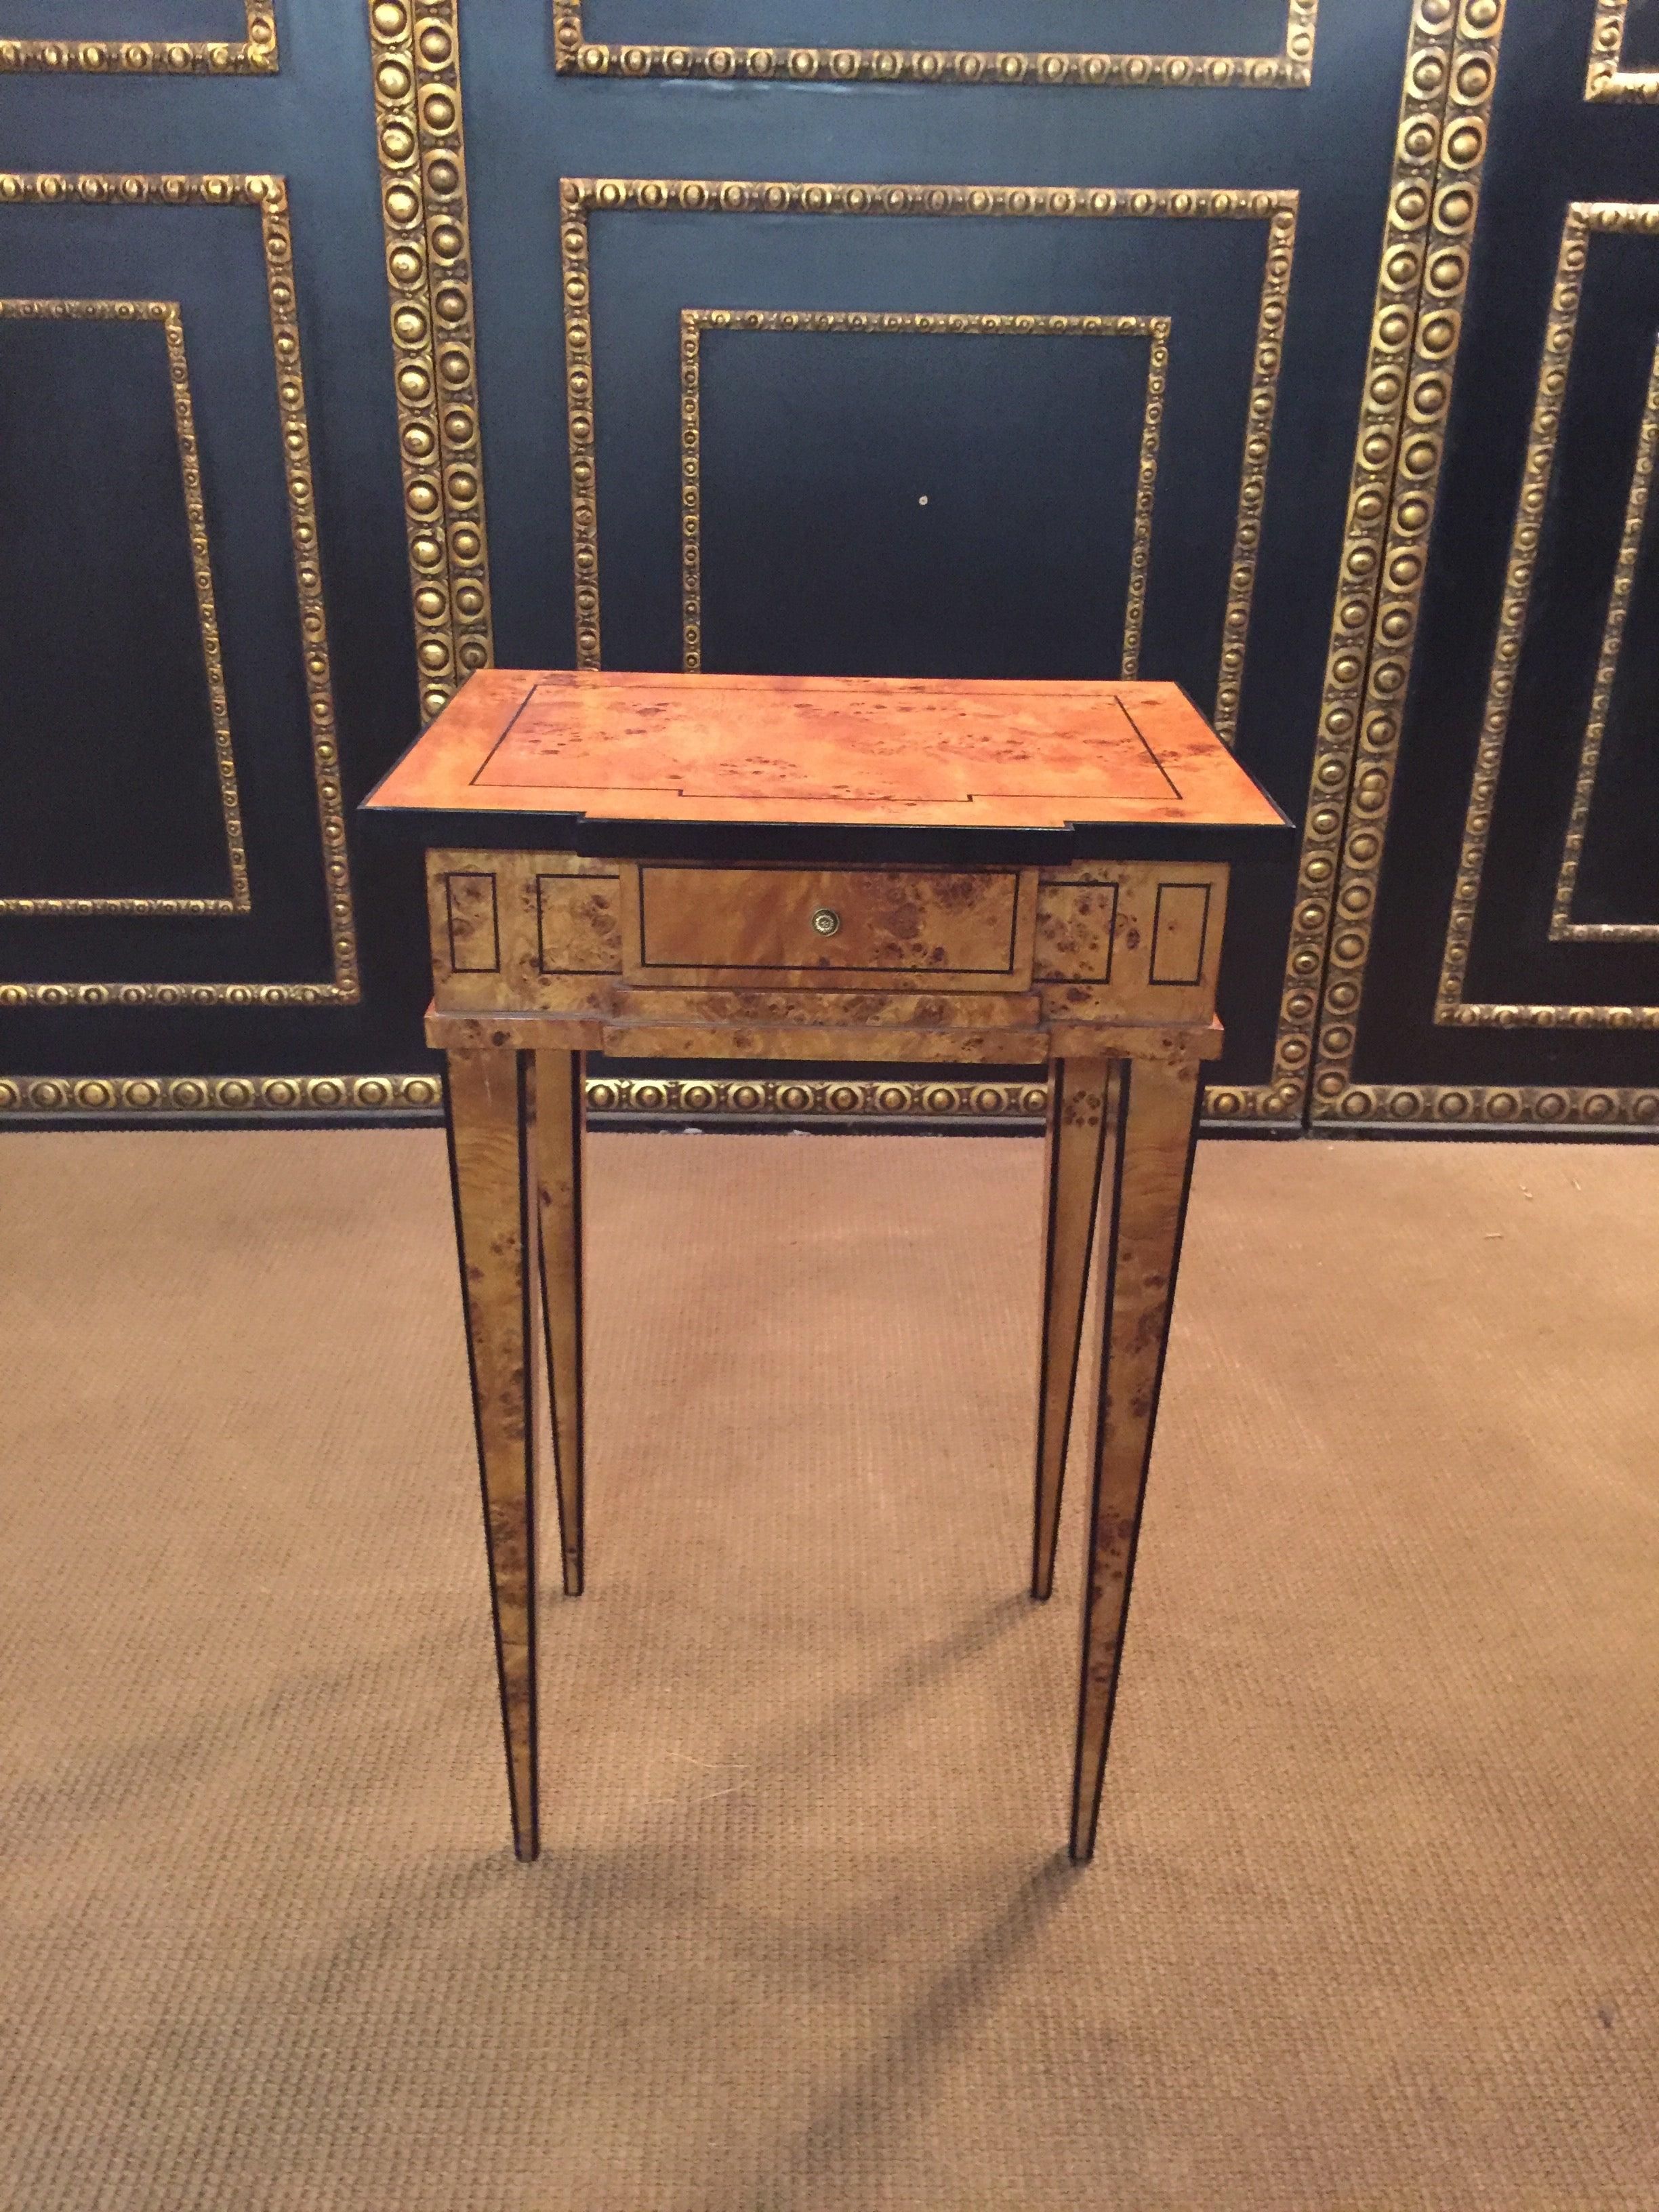 20th. Occasional table in classicist style. Bird’s-eye maple on pinewood,
framed marquetry fields from band intarsia.